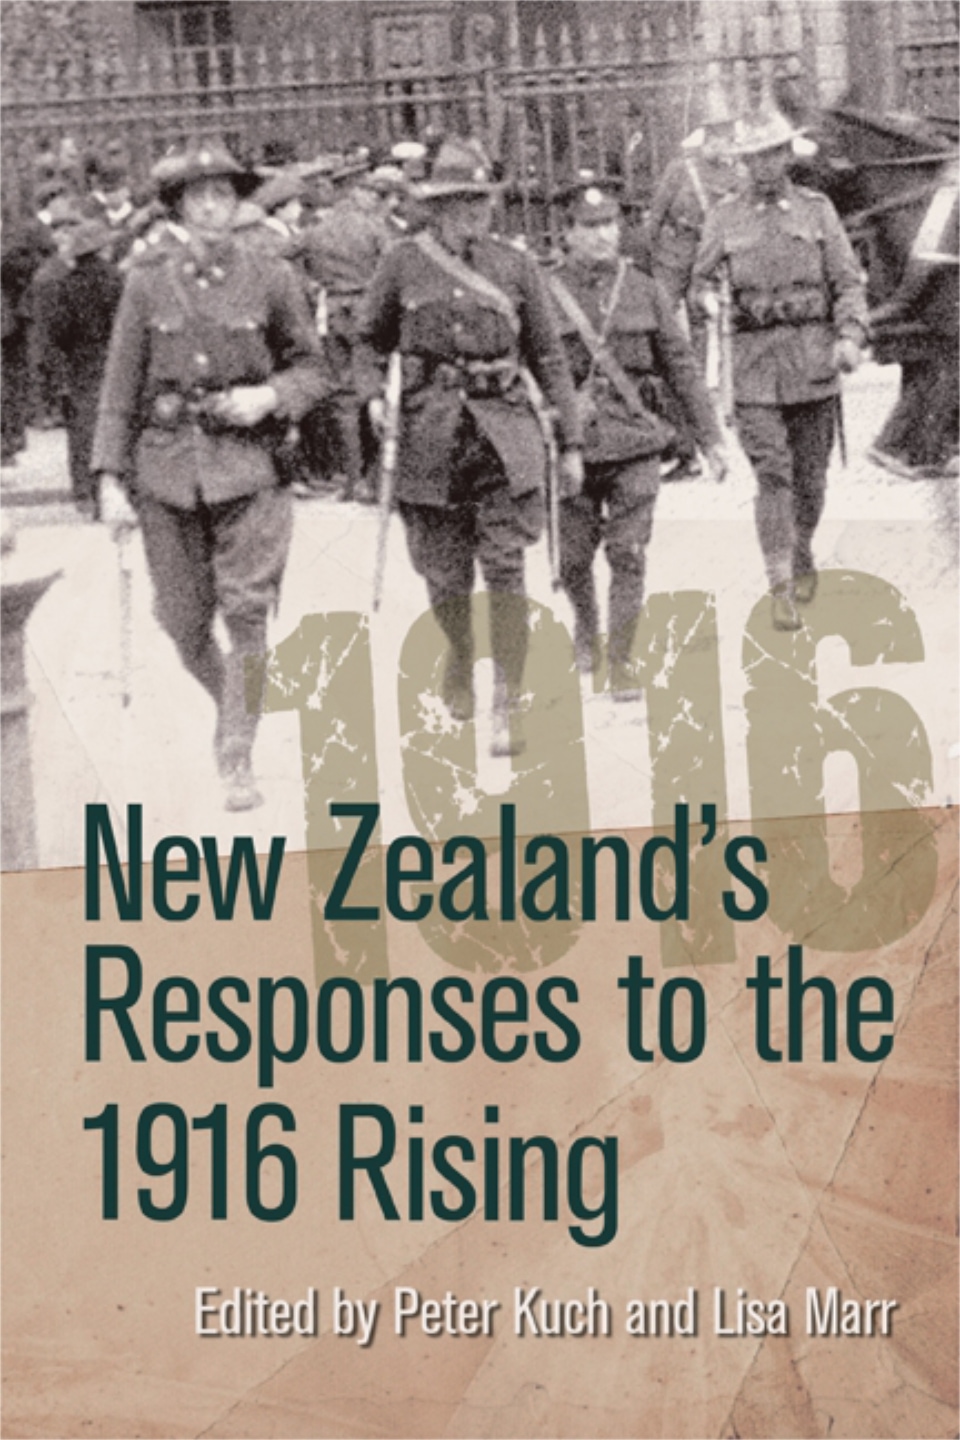 New Zealand's Responses to the 1916 Rising